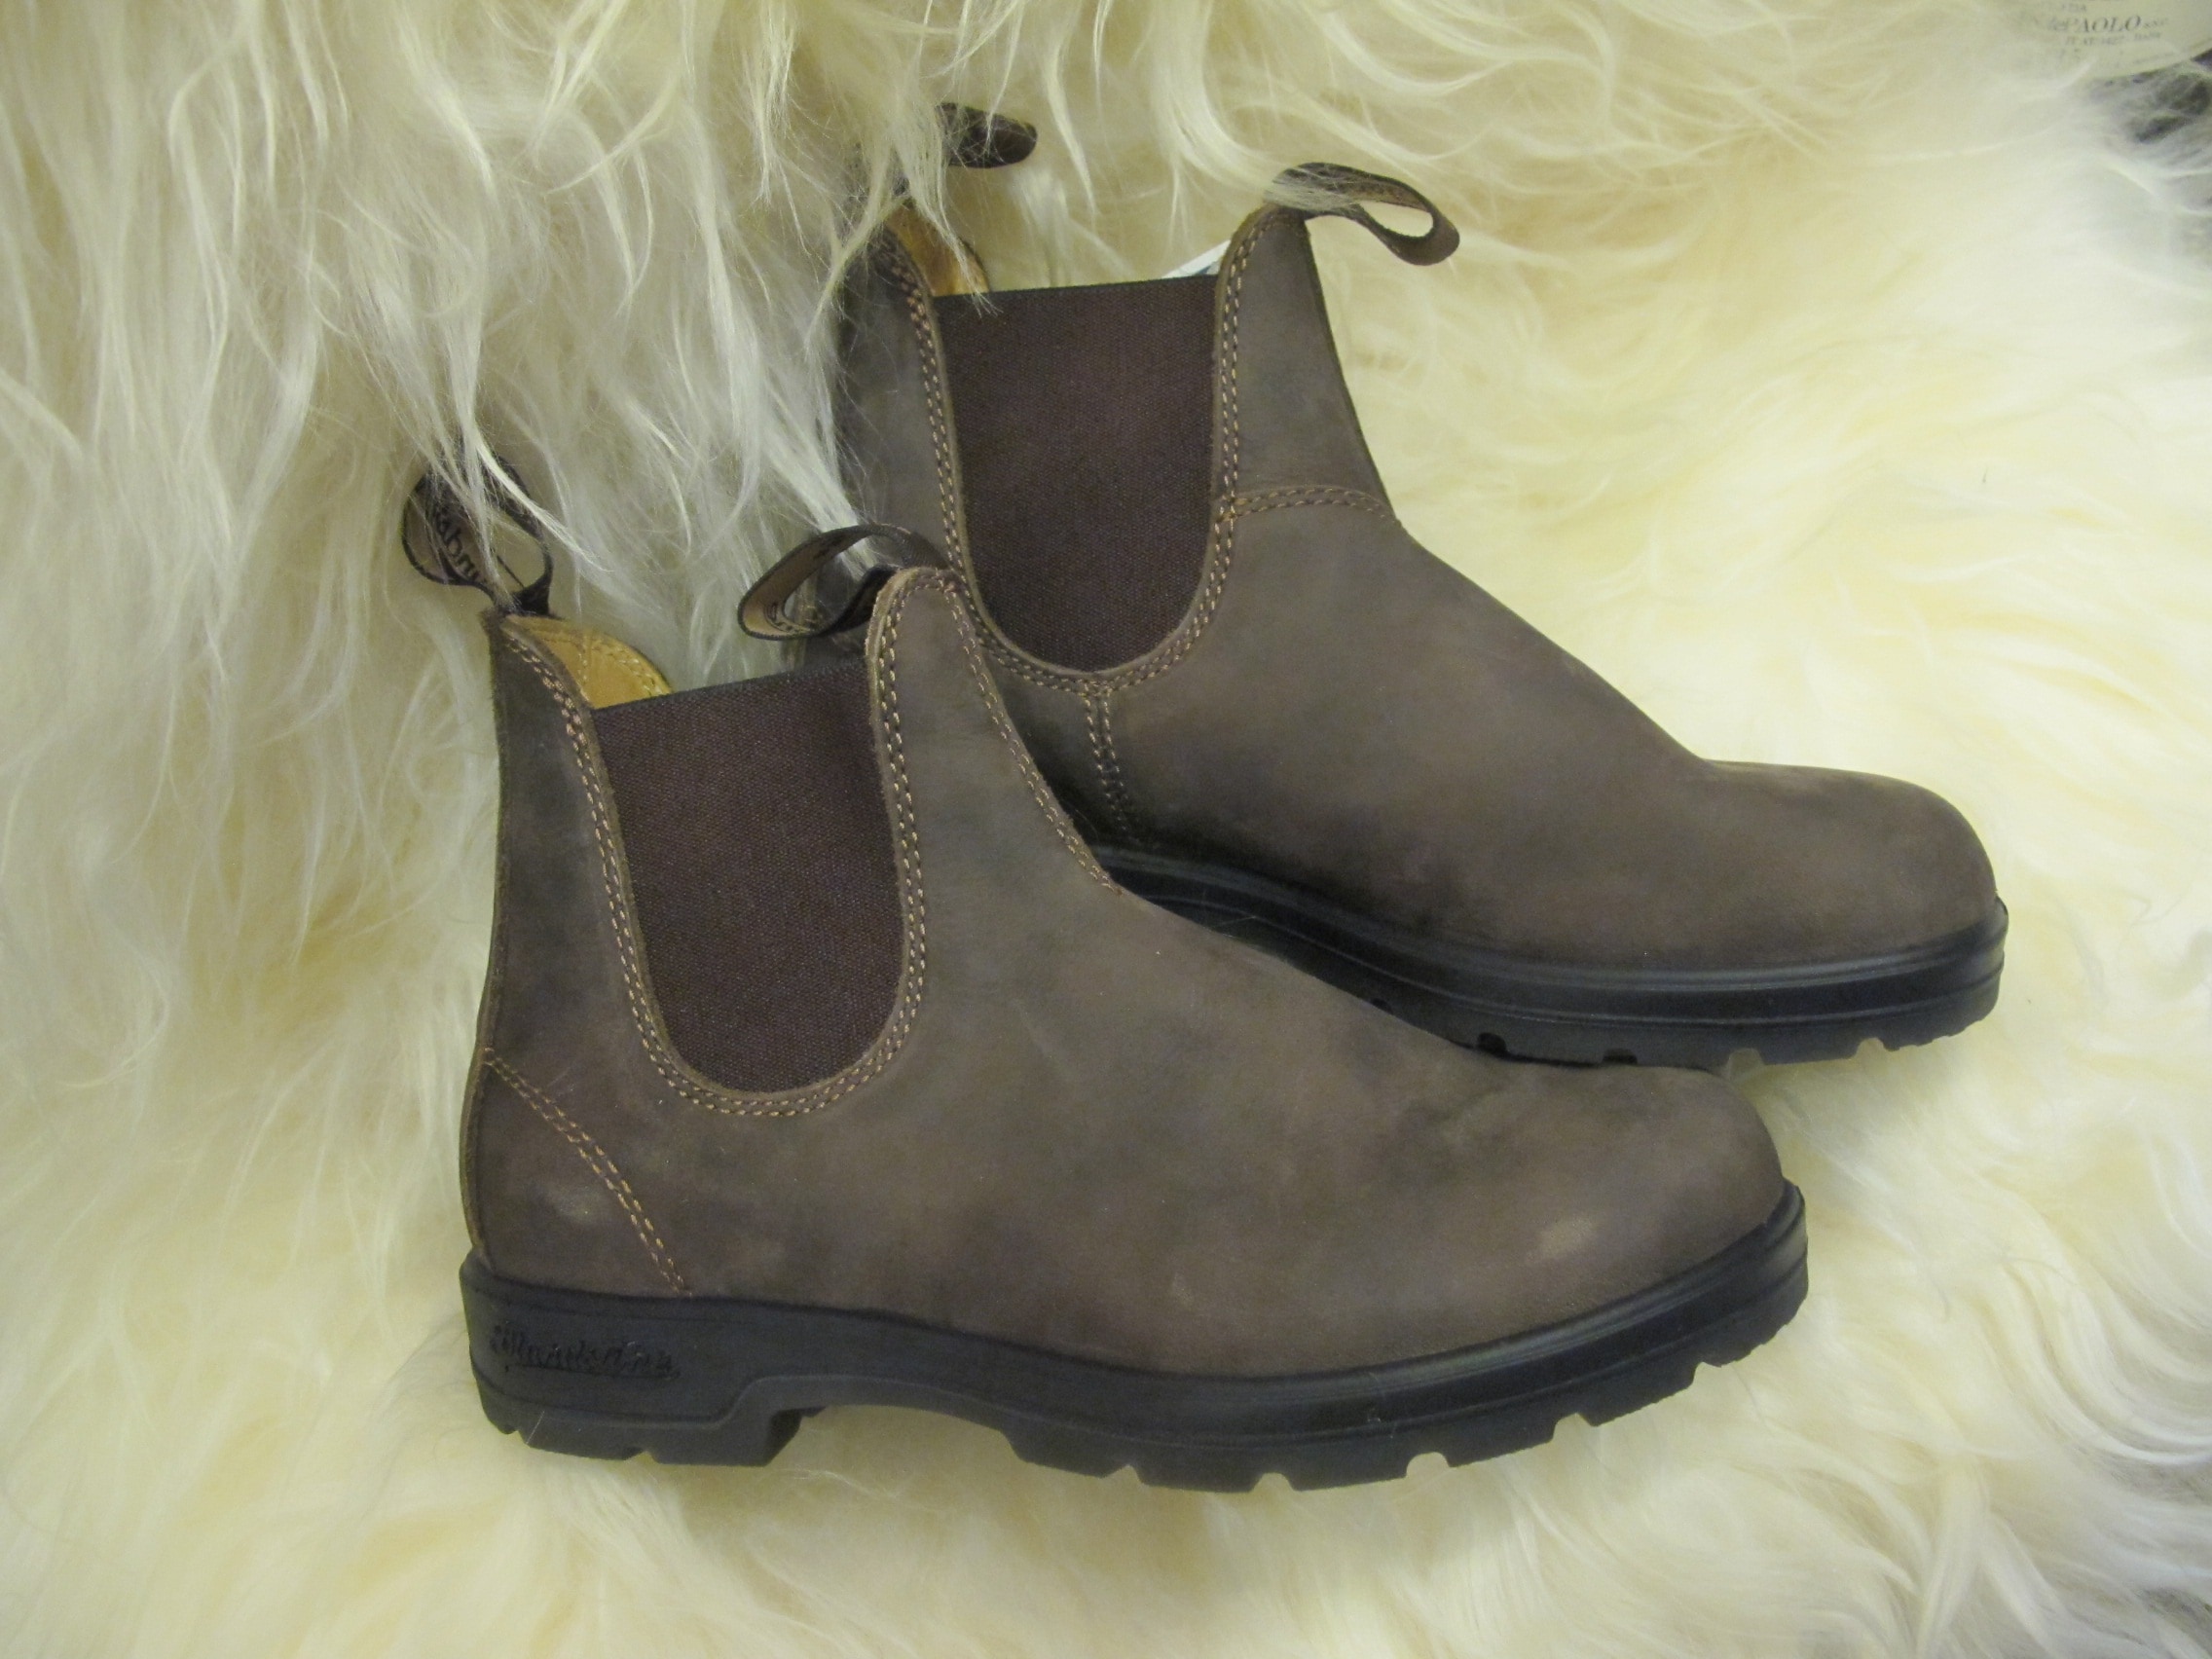 pair of leather boots on fur textile